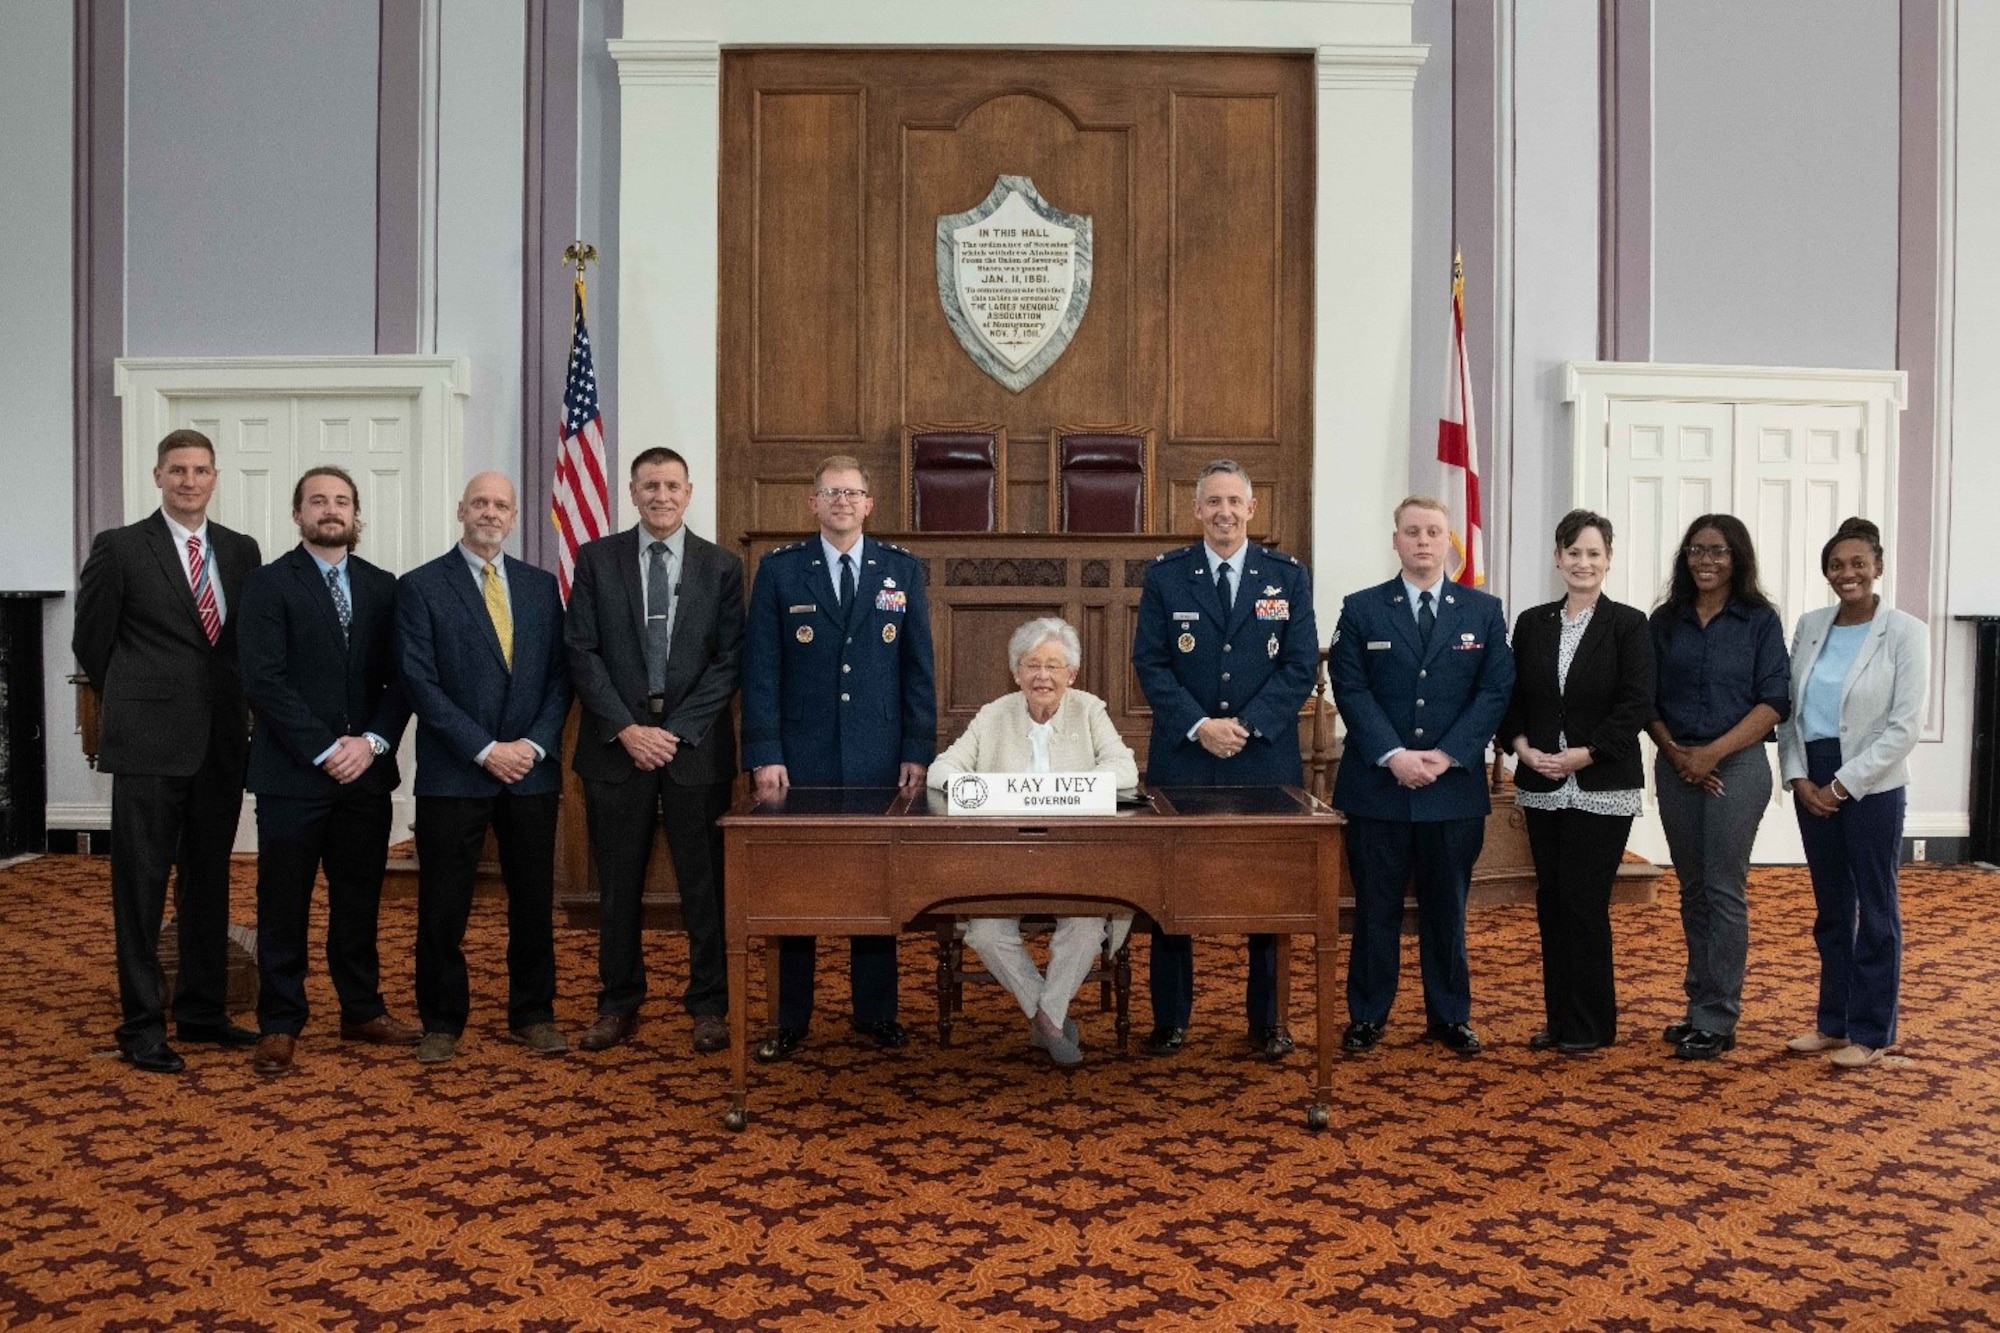 Air Force Culture and Language Center personnel, along with Maj. Gen. Parker Wright and Col. Robert Rowell, watch as Alabama Governor Kay Ivey signs a proclamation on Oct. 2, 2023, declaring the month of November as Language, Regional Expertise, and Culture Month in honor of the Air University LREC Symposium at Maxwell Air Force Base, Ala. L-R: Scott Alford, Riley Hunt, Greg Day, Walter Ward, Maj. Gen. Parker Wright, Gov. Ivey, Col. Robert Rowell, Senior Airman Corbin Miller, Lori Quiller, TaeAjah Cannon-Barnes, and Mikala McCurry.